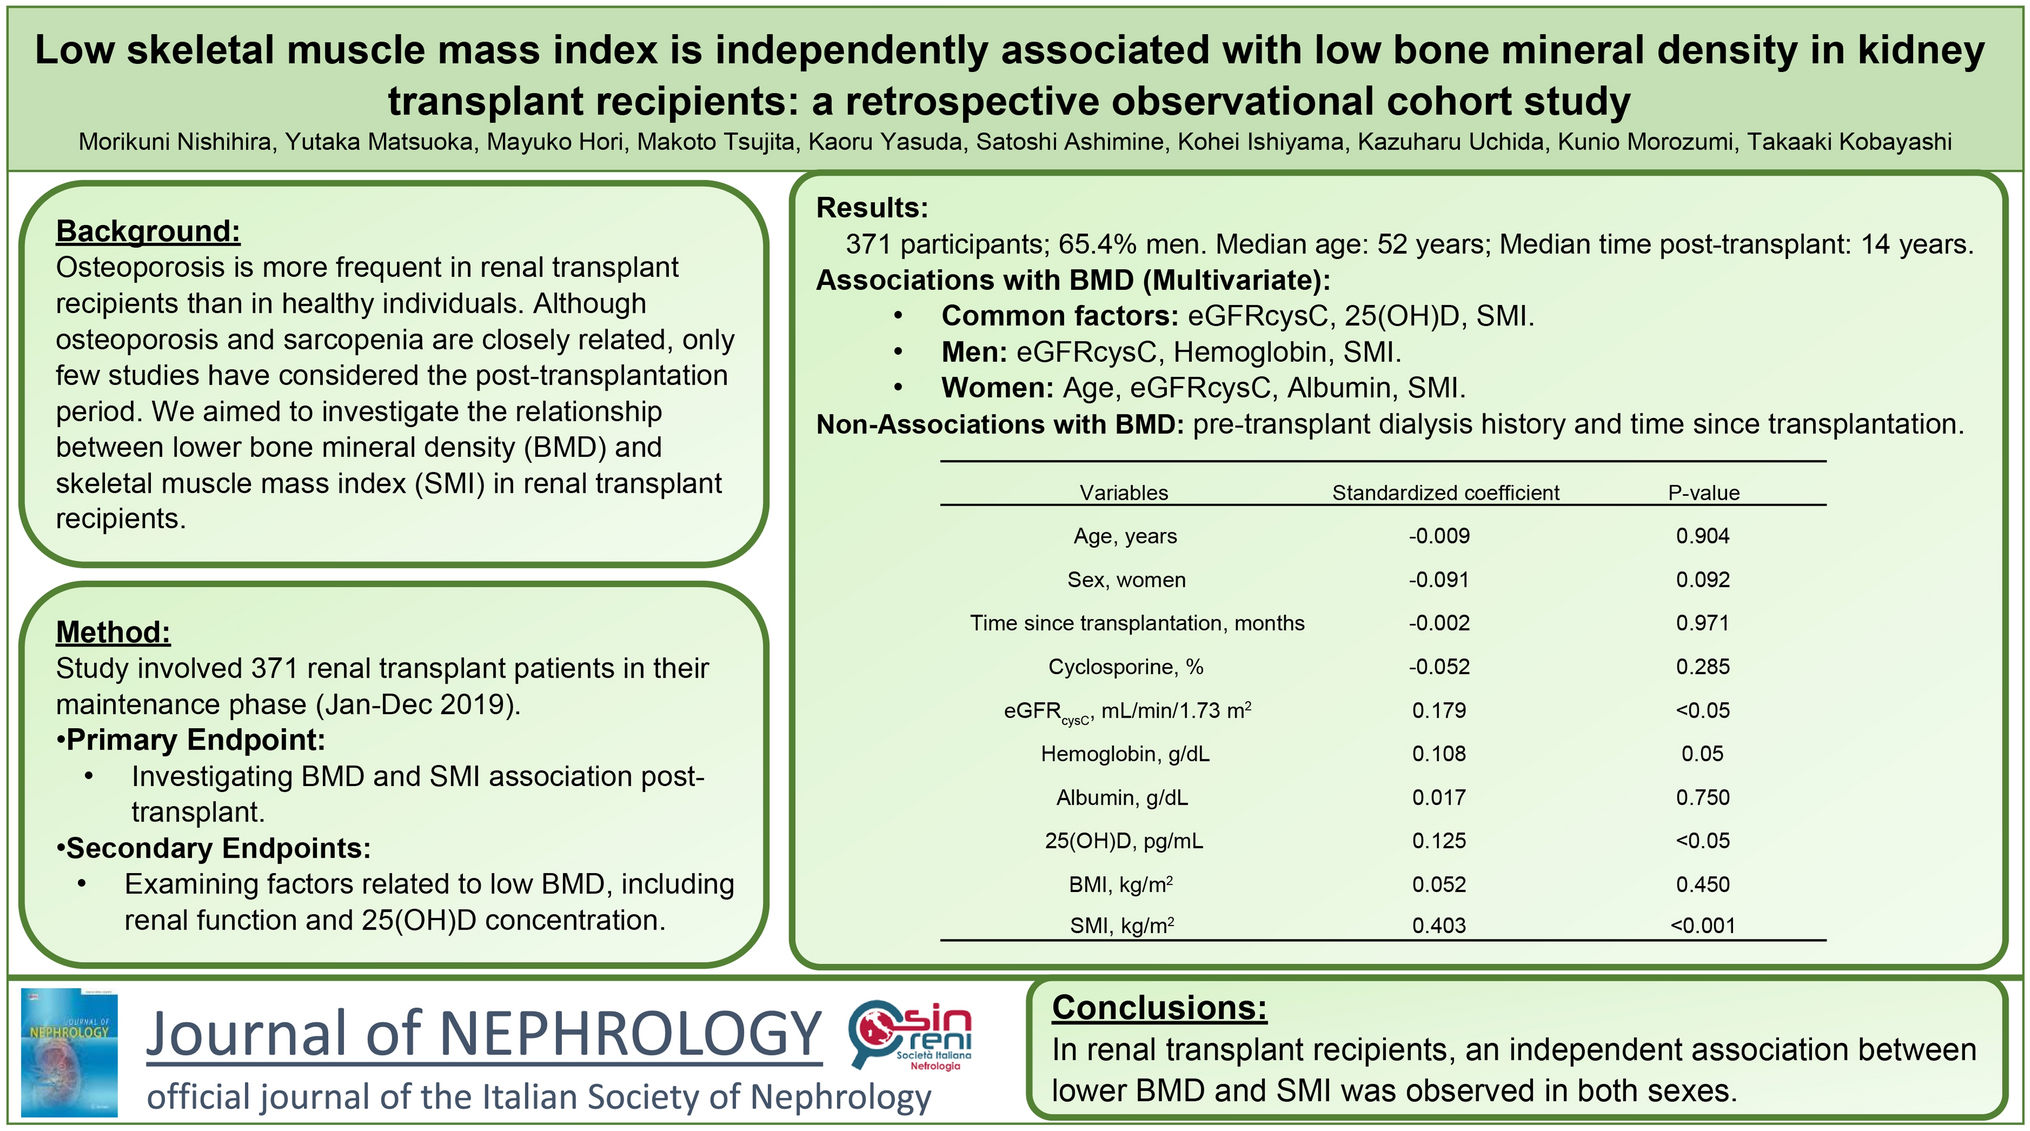 Low skeletal muscle mass index is independently associated with low bone mineral density in kidney transplant recipients: a retrospective observational cohort study